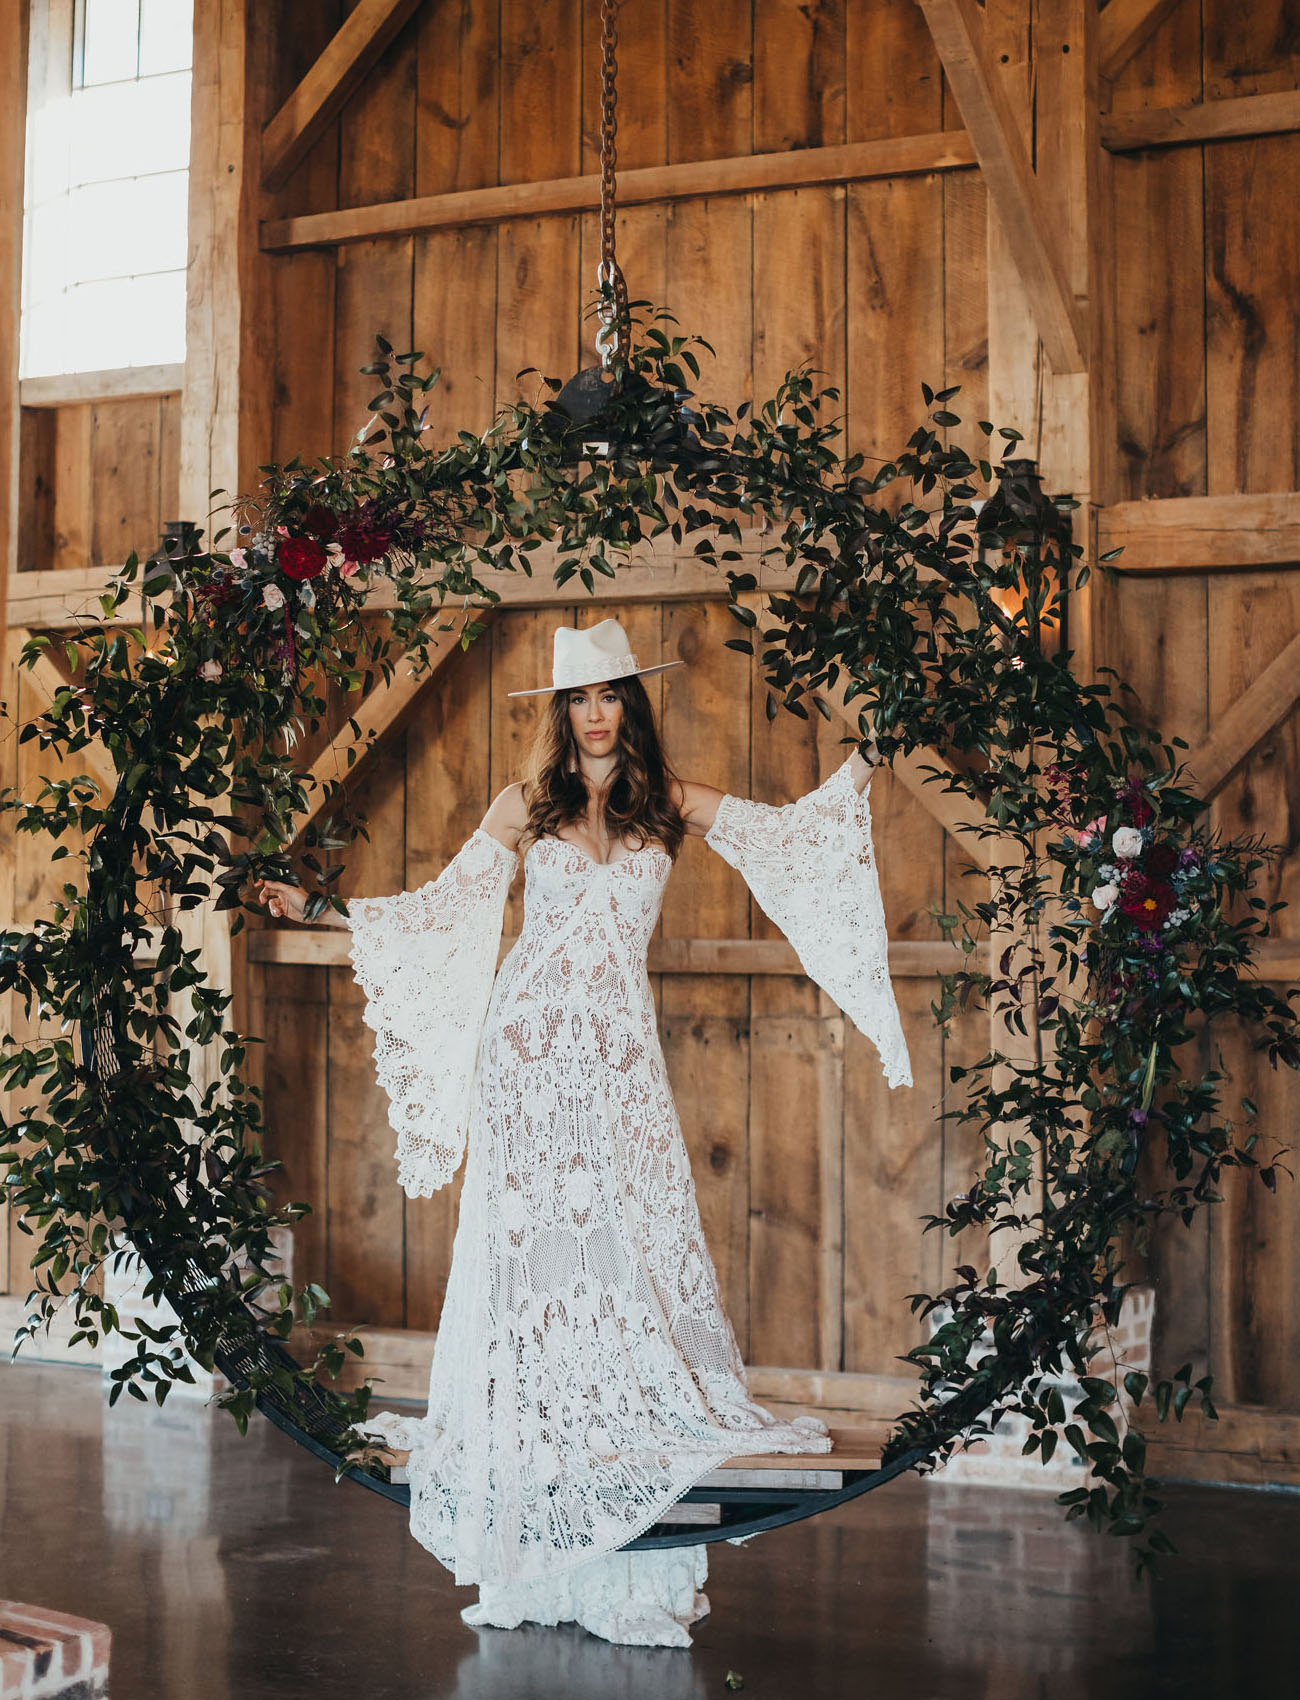 The bride was wearing a strapless boho lace wedding dress with removable sleeves and a matching hat